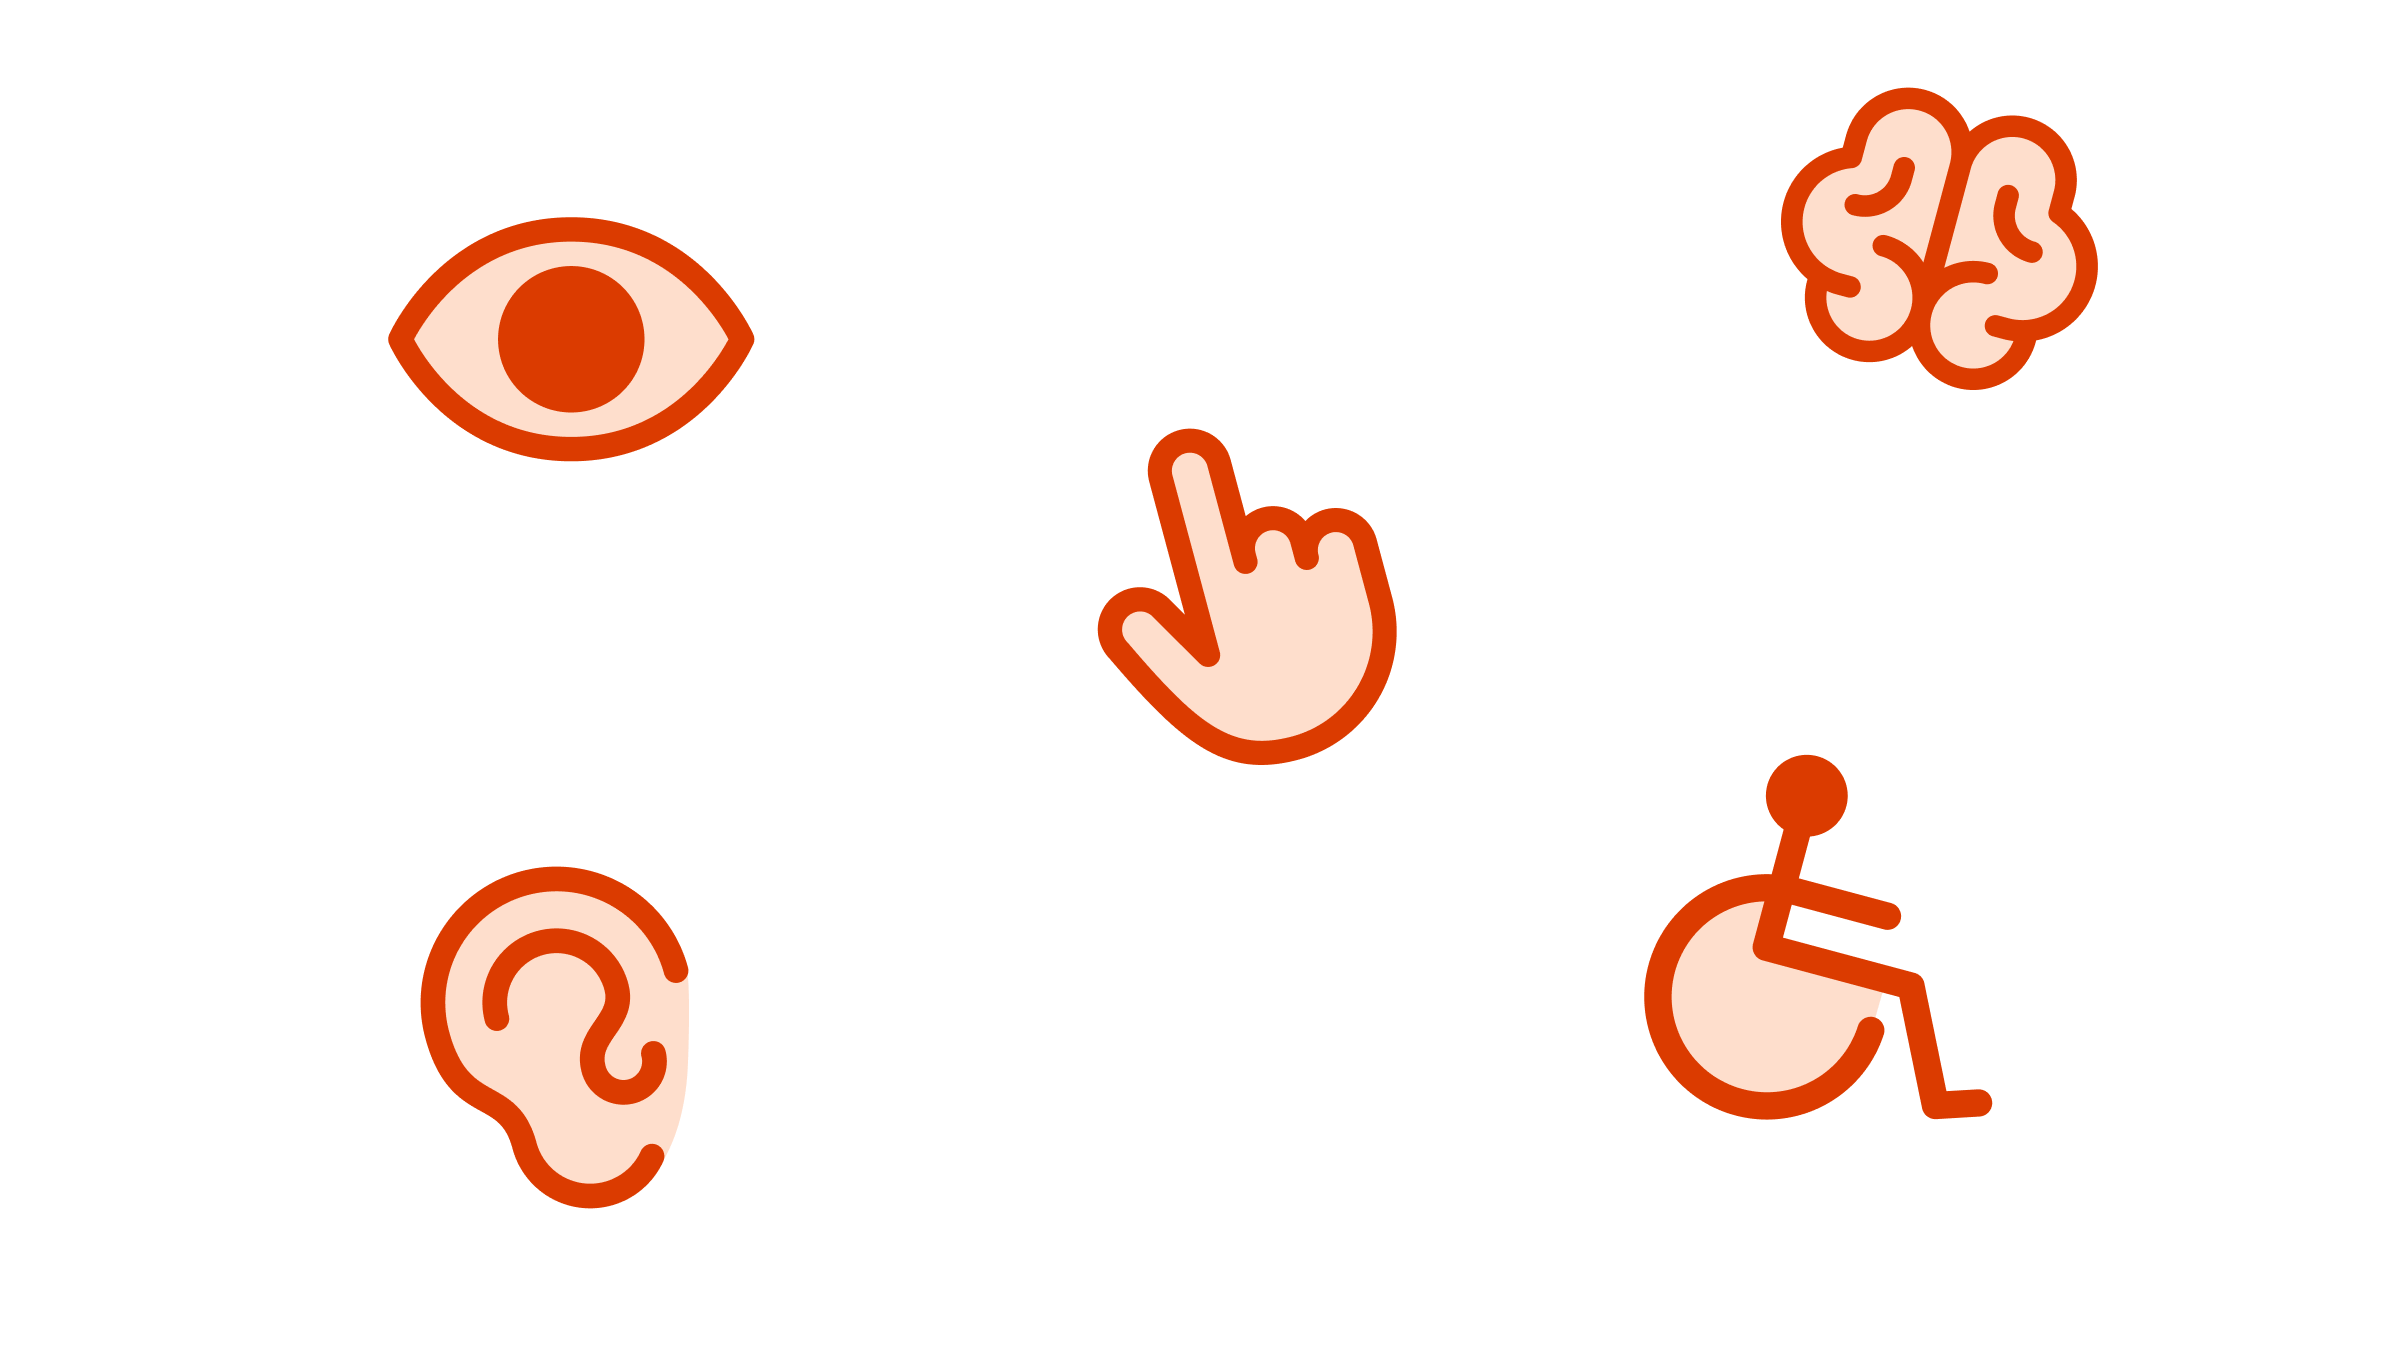 Icons for types of disabilities - physical, visual, auditory, and mental or neurological